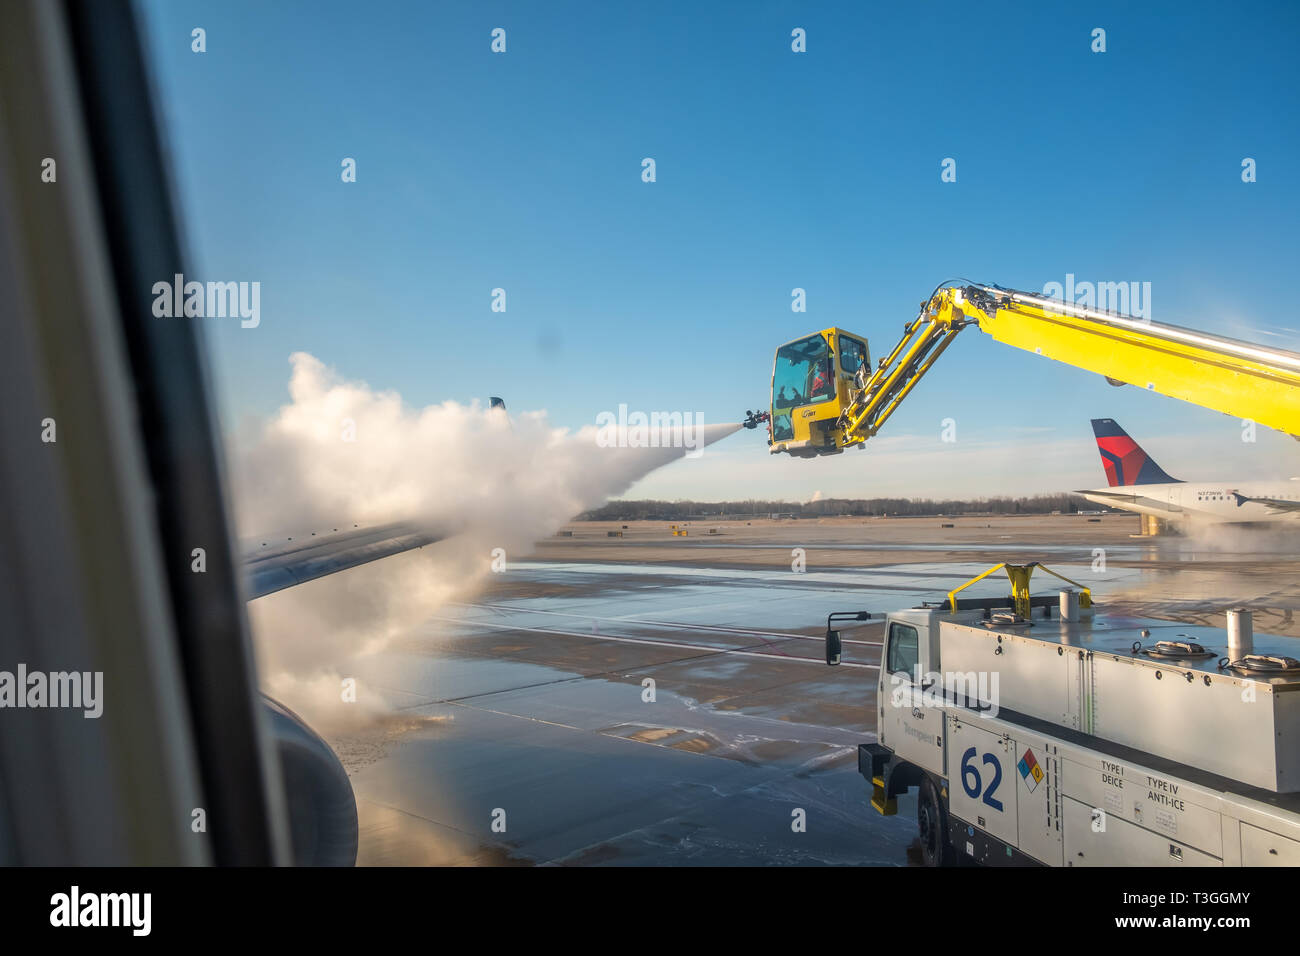 Jet wing being de-iced. Detroit Metro Airport (DTW), USA. Stock Photo